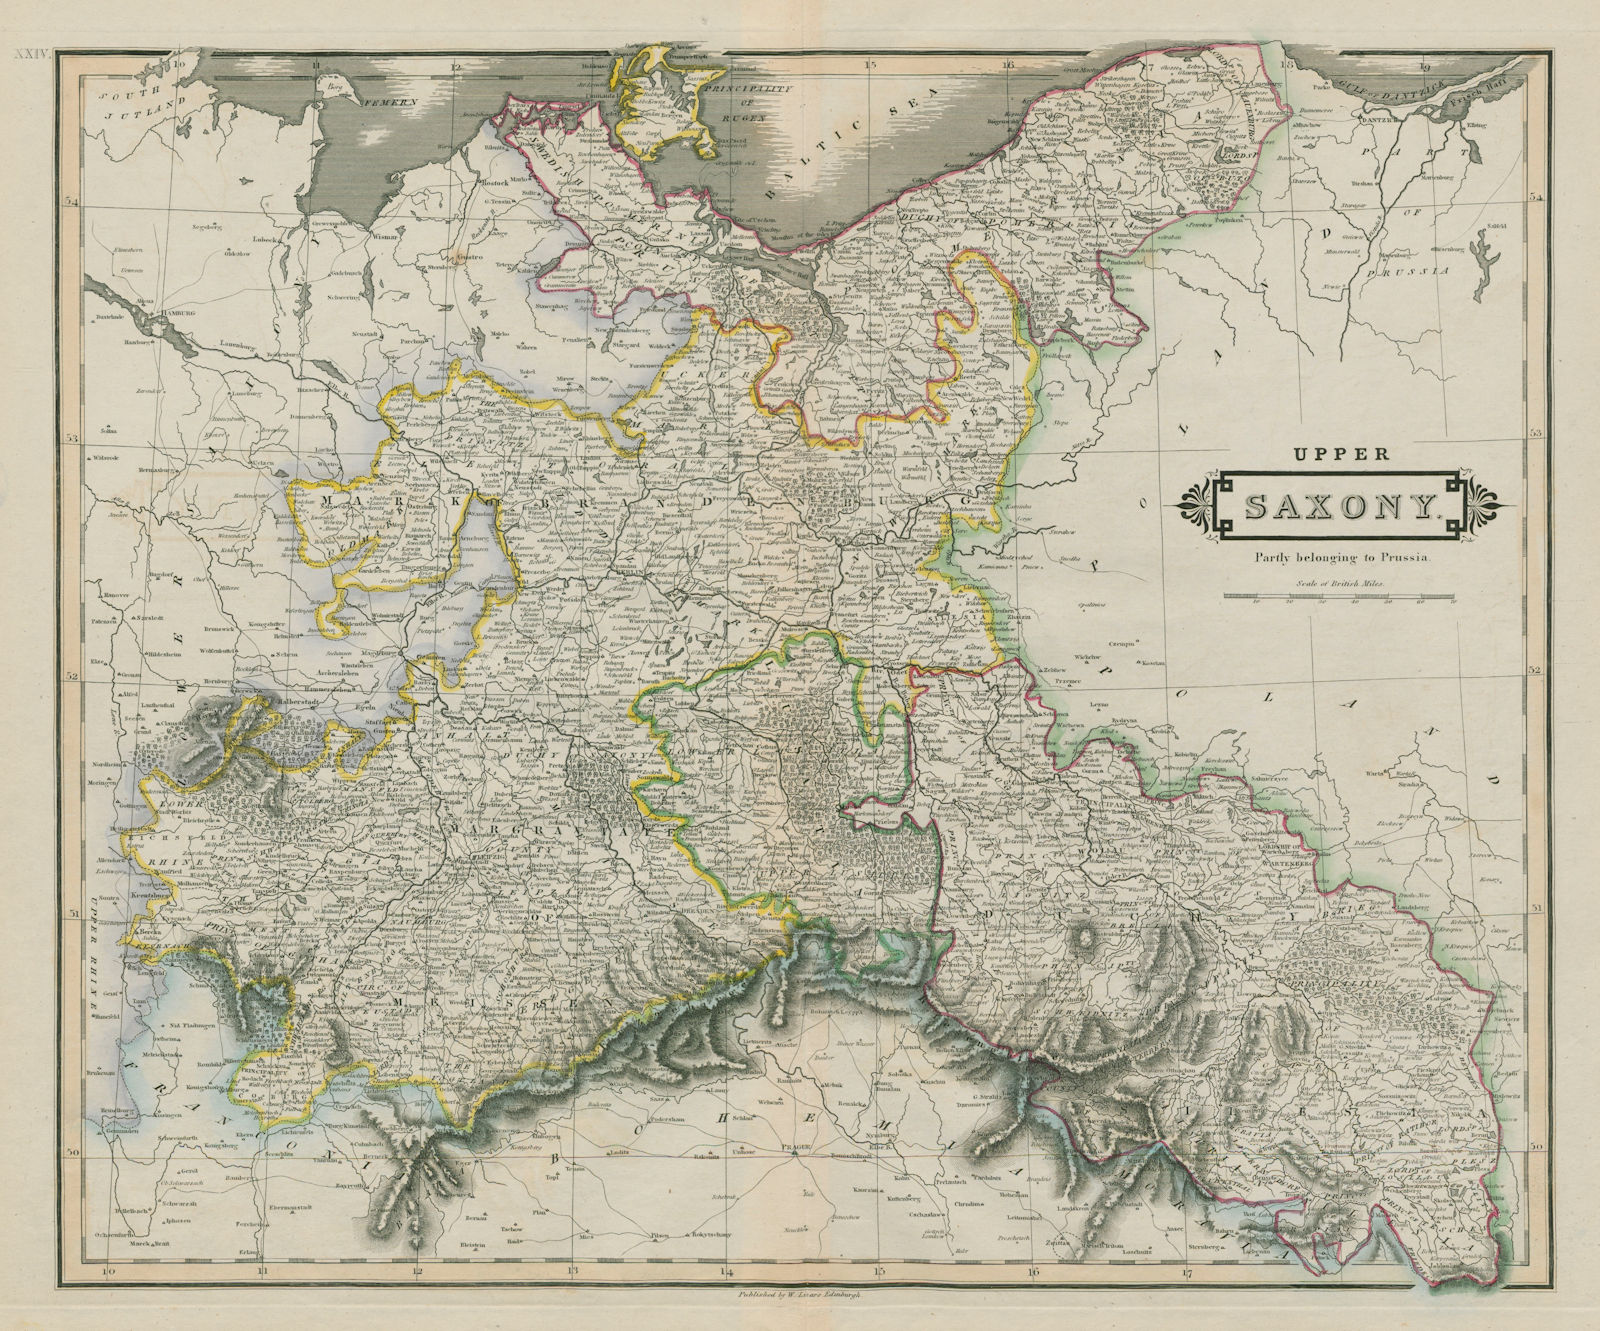 Associate Product Upper Saxony, partly belonging to Prussia. E Germany. W Poland. LIZARS 1842 map